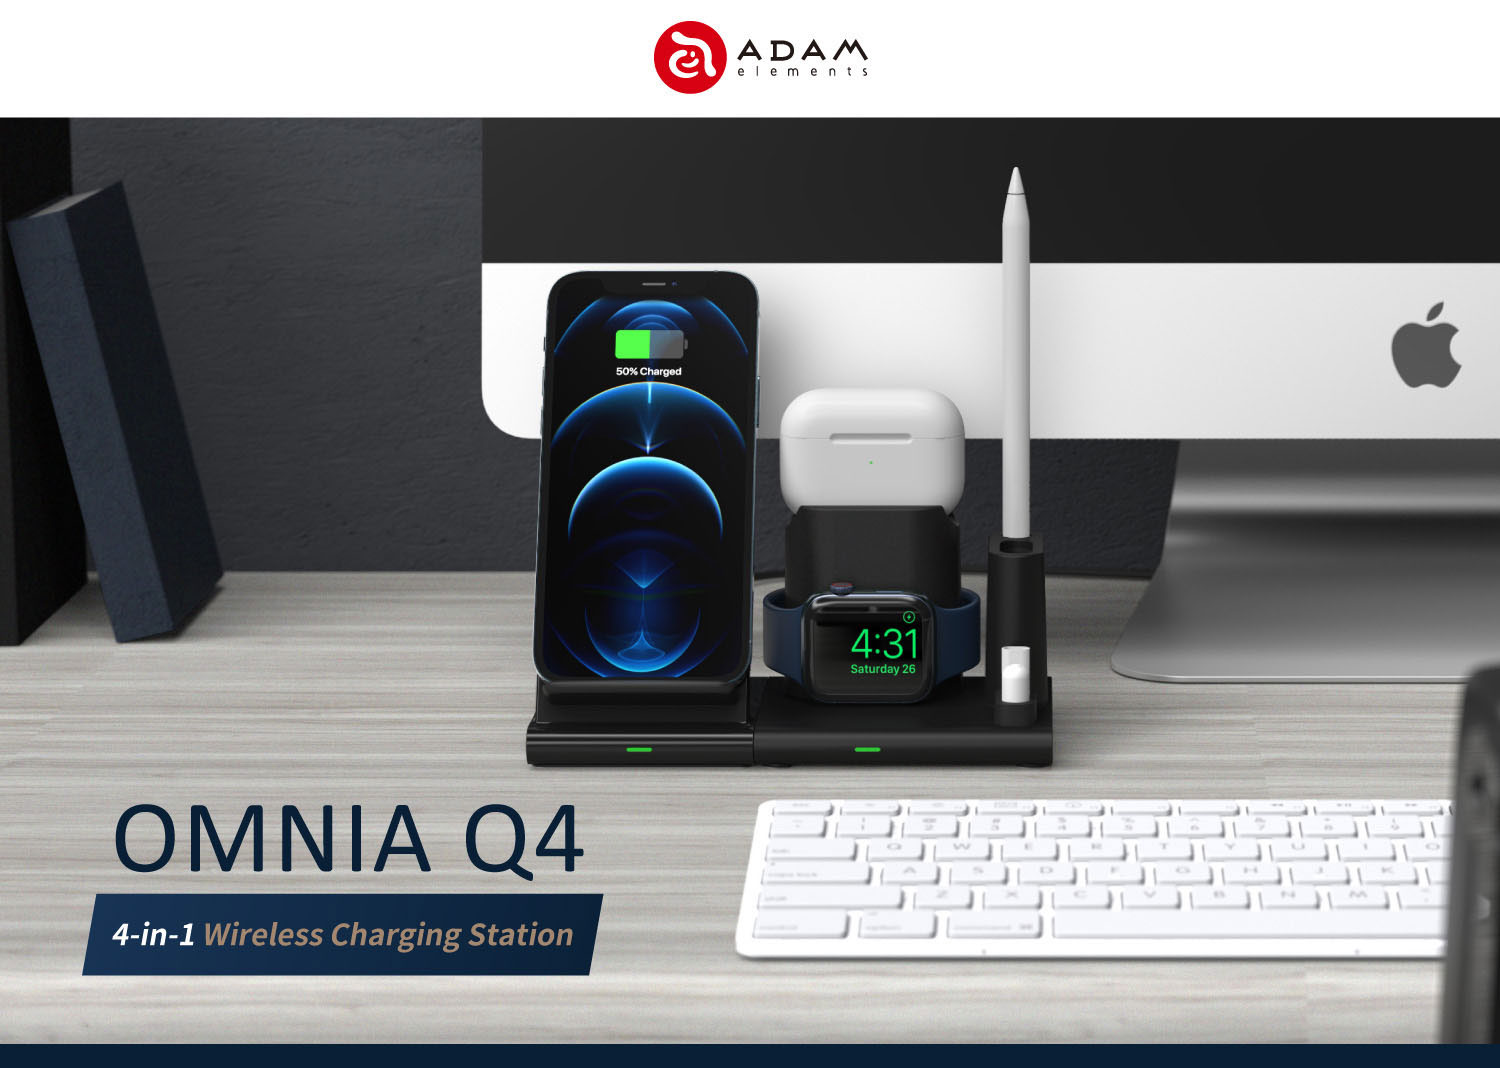 OMNIA Q4 15W 4 in 1 Wireless Charging Station No Adapter Included x 2 1